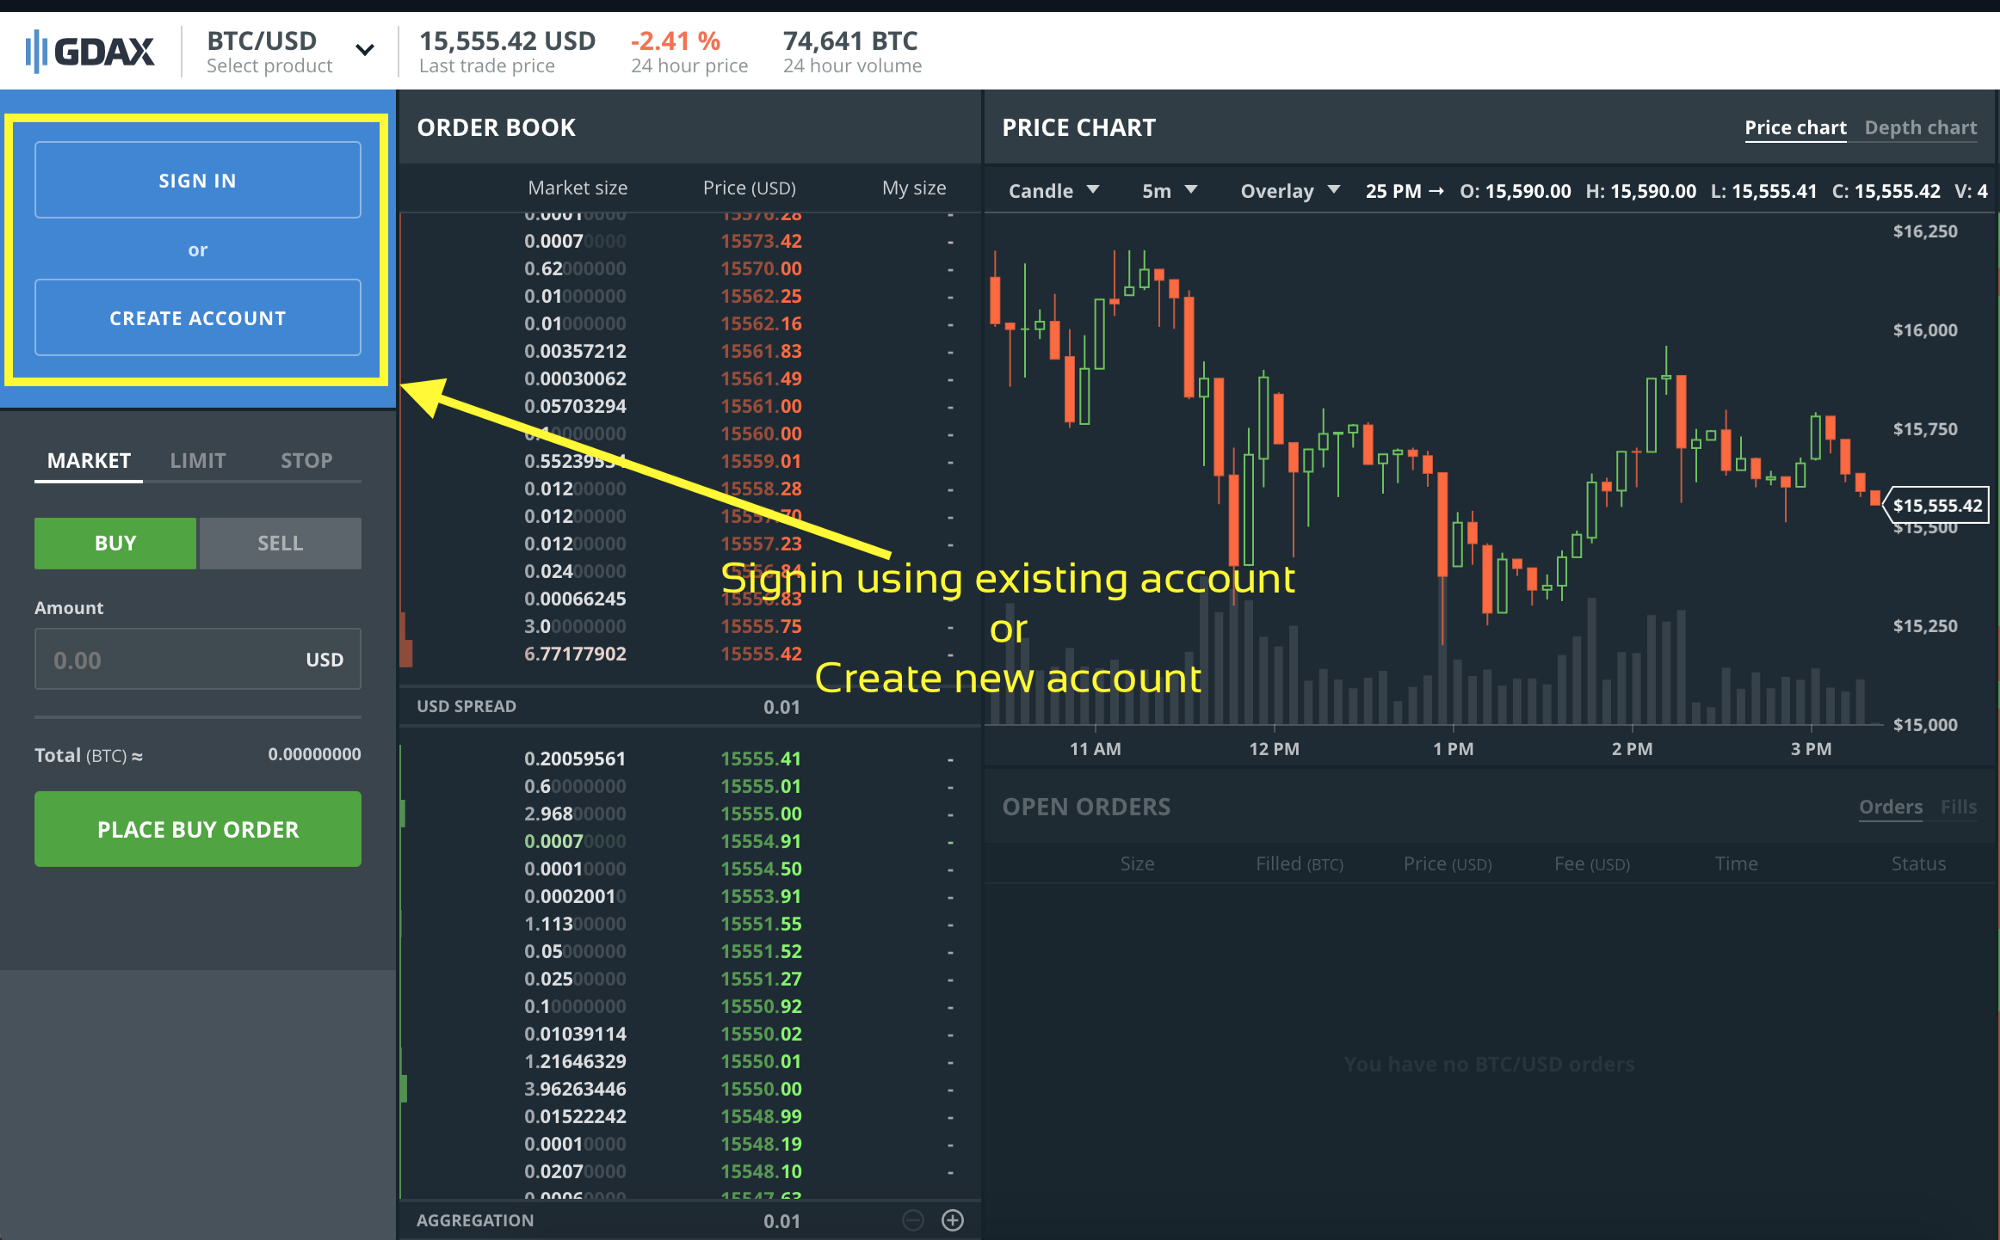 how to trade bitcoin for litecoin on gdax